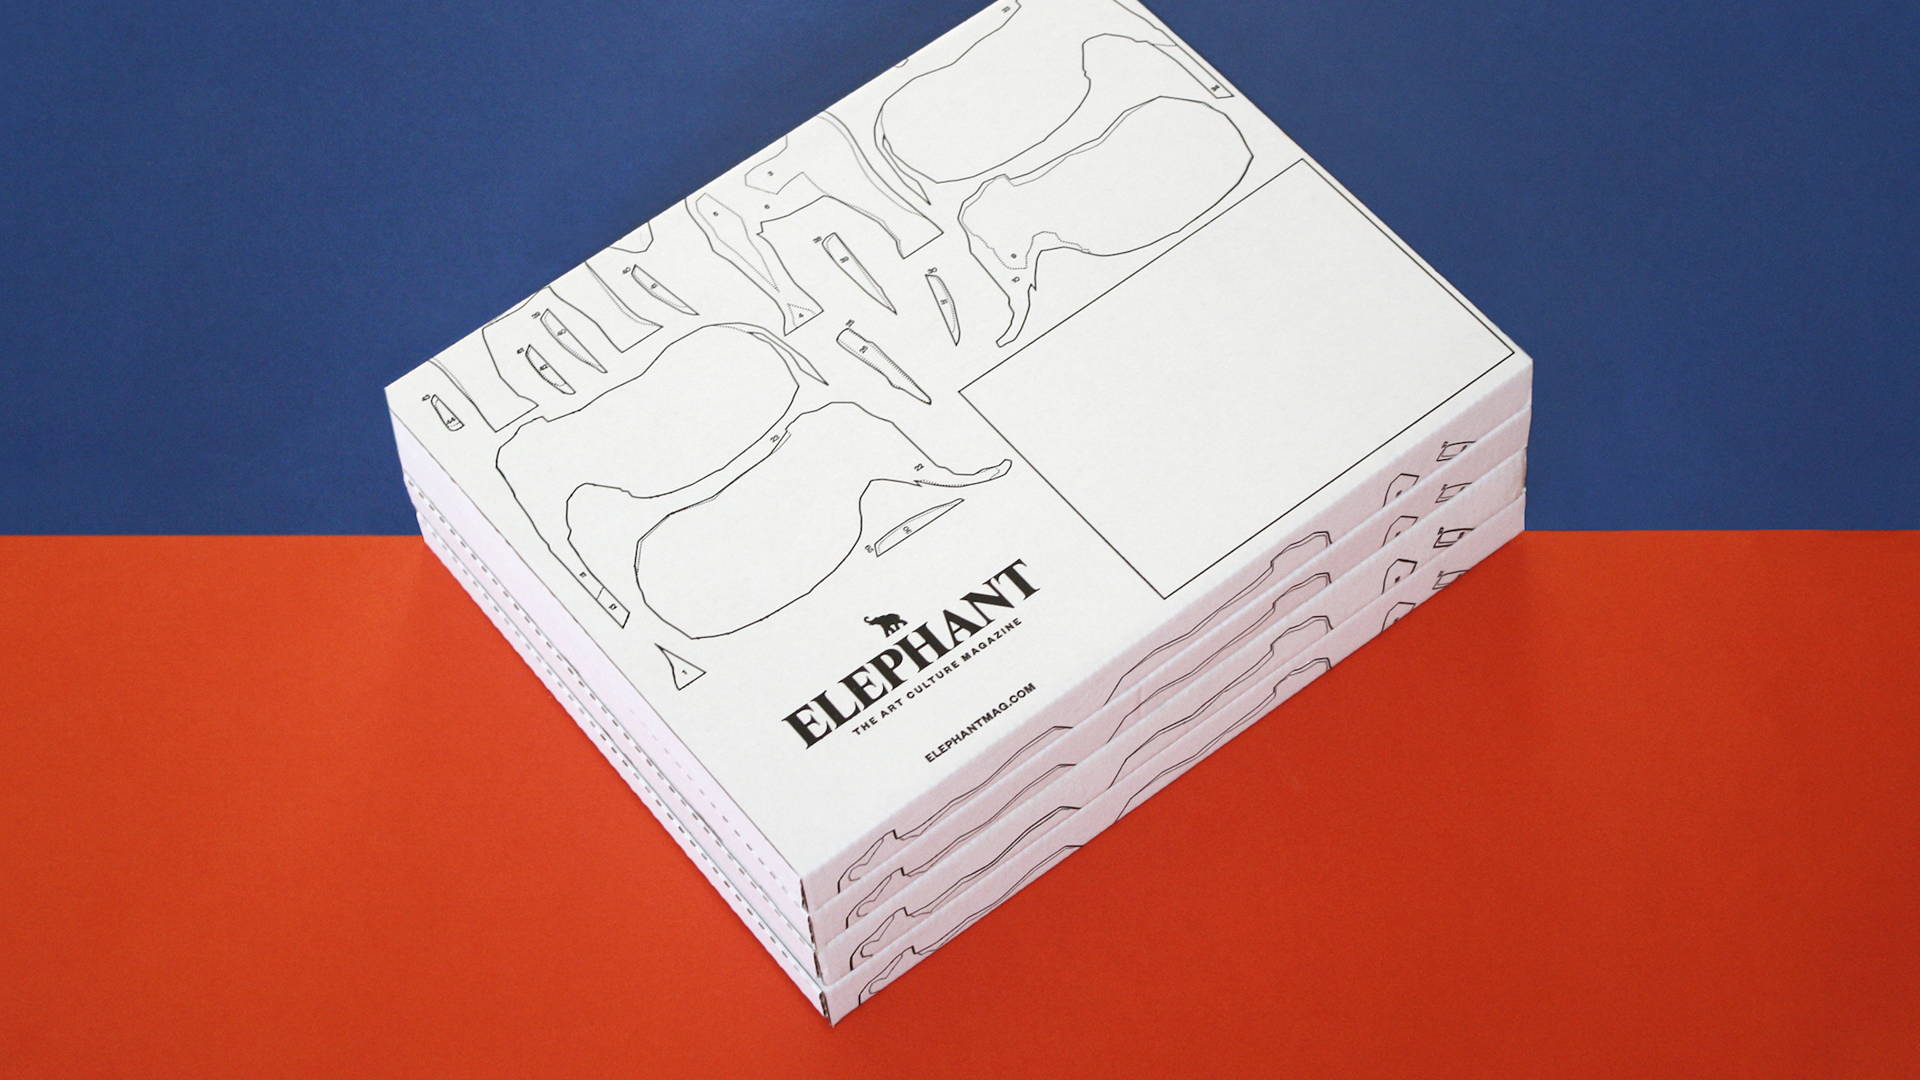 Featured image for Elephant Magazine has Packaging You Won’t Want to Toss